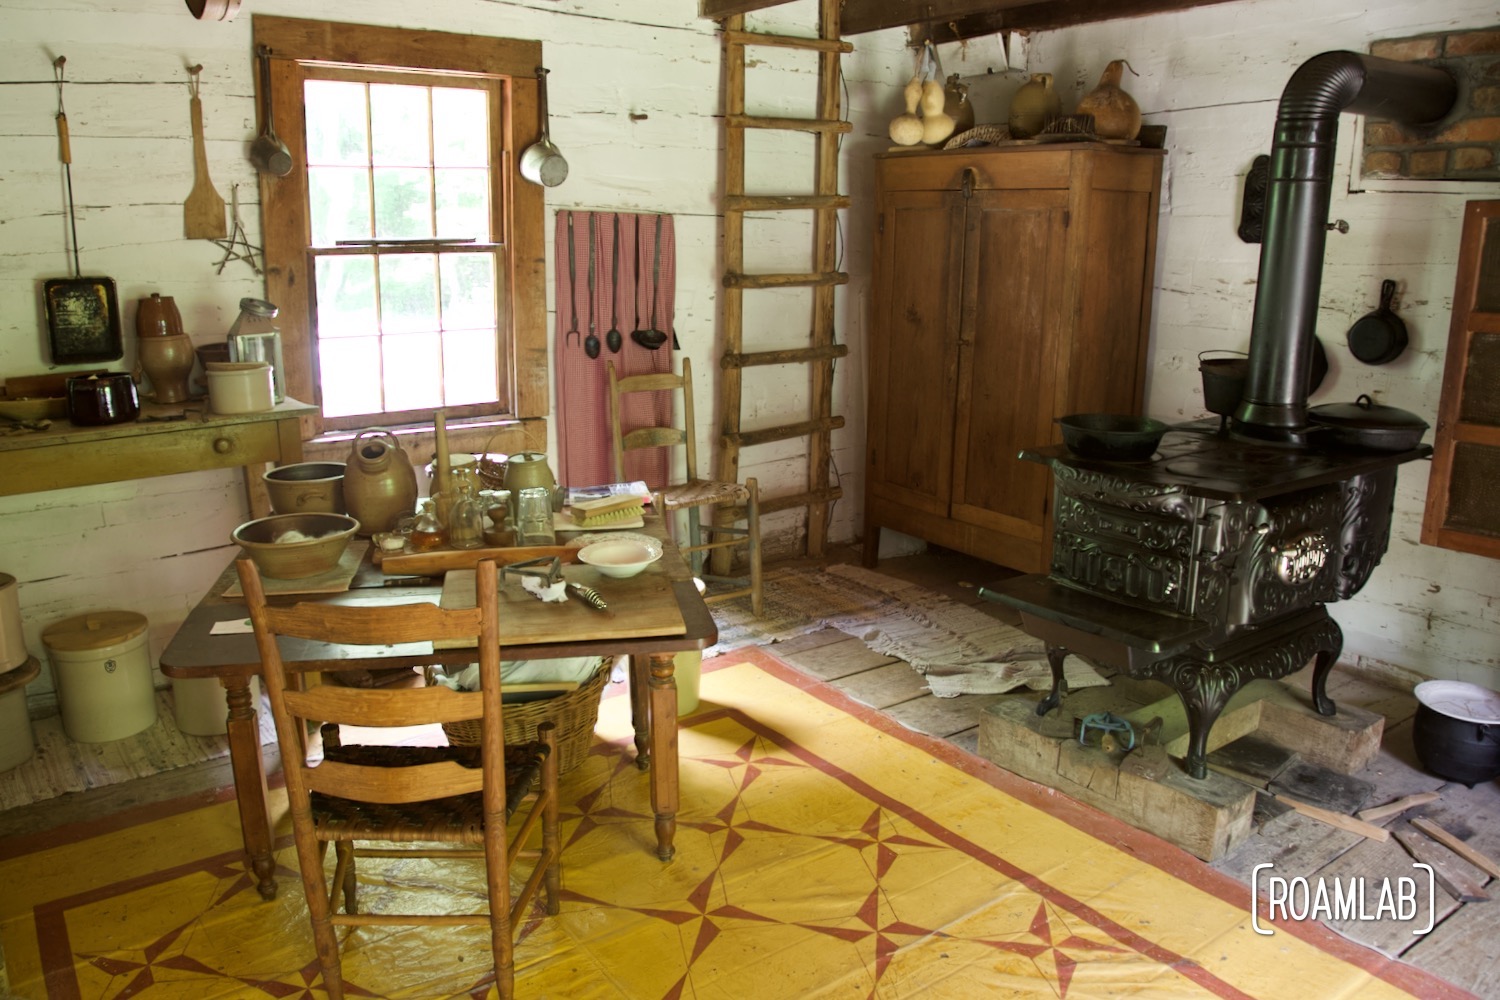 Kitchen interior of a double pen house in Homeplace 1850s Working Farm and Living History Museum.